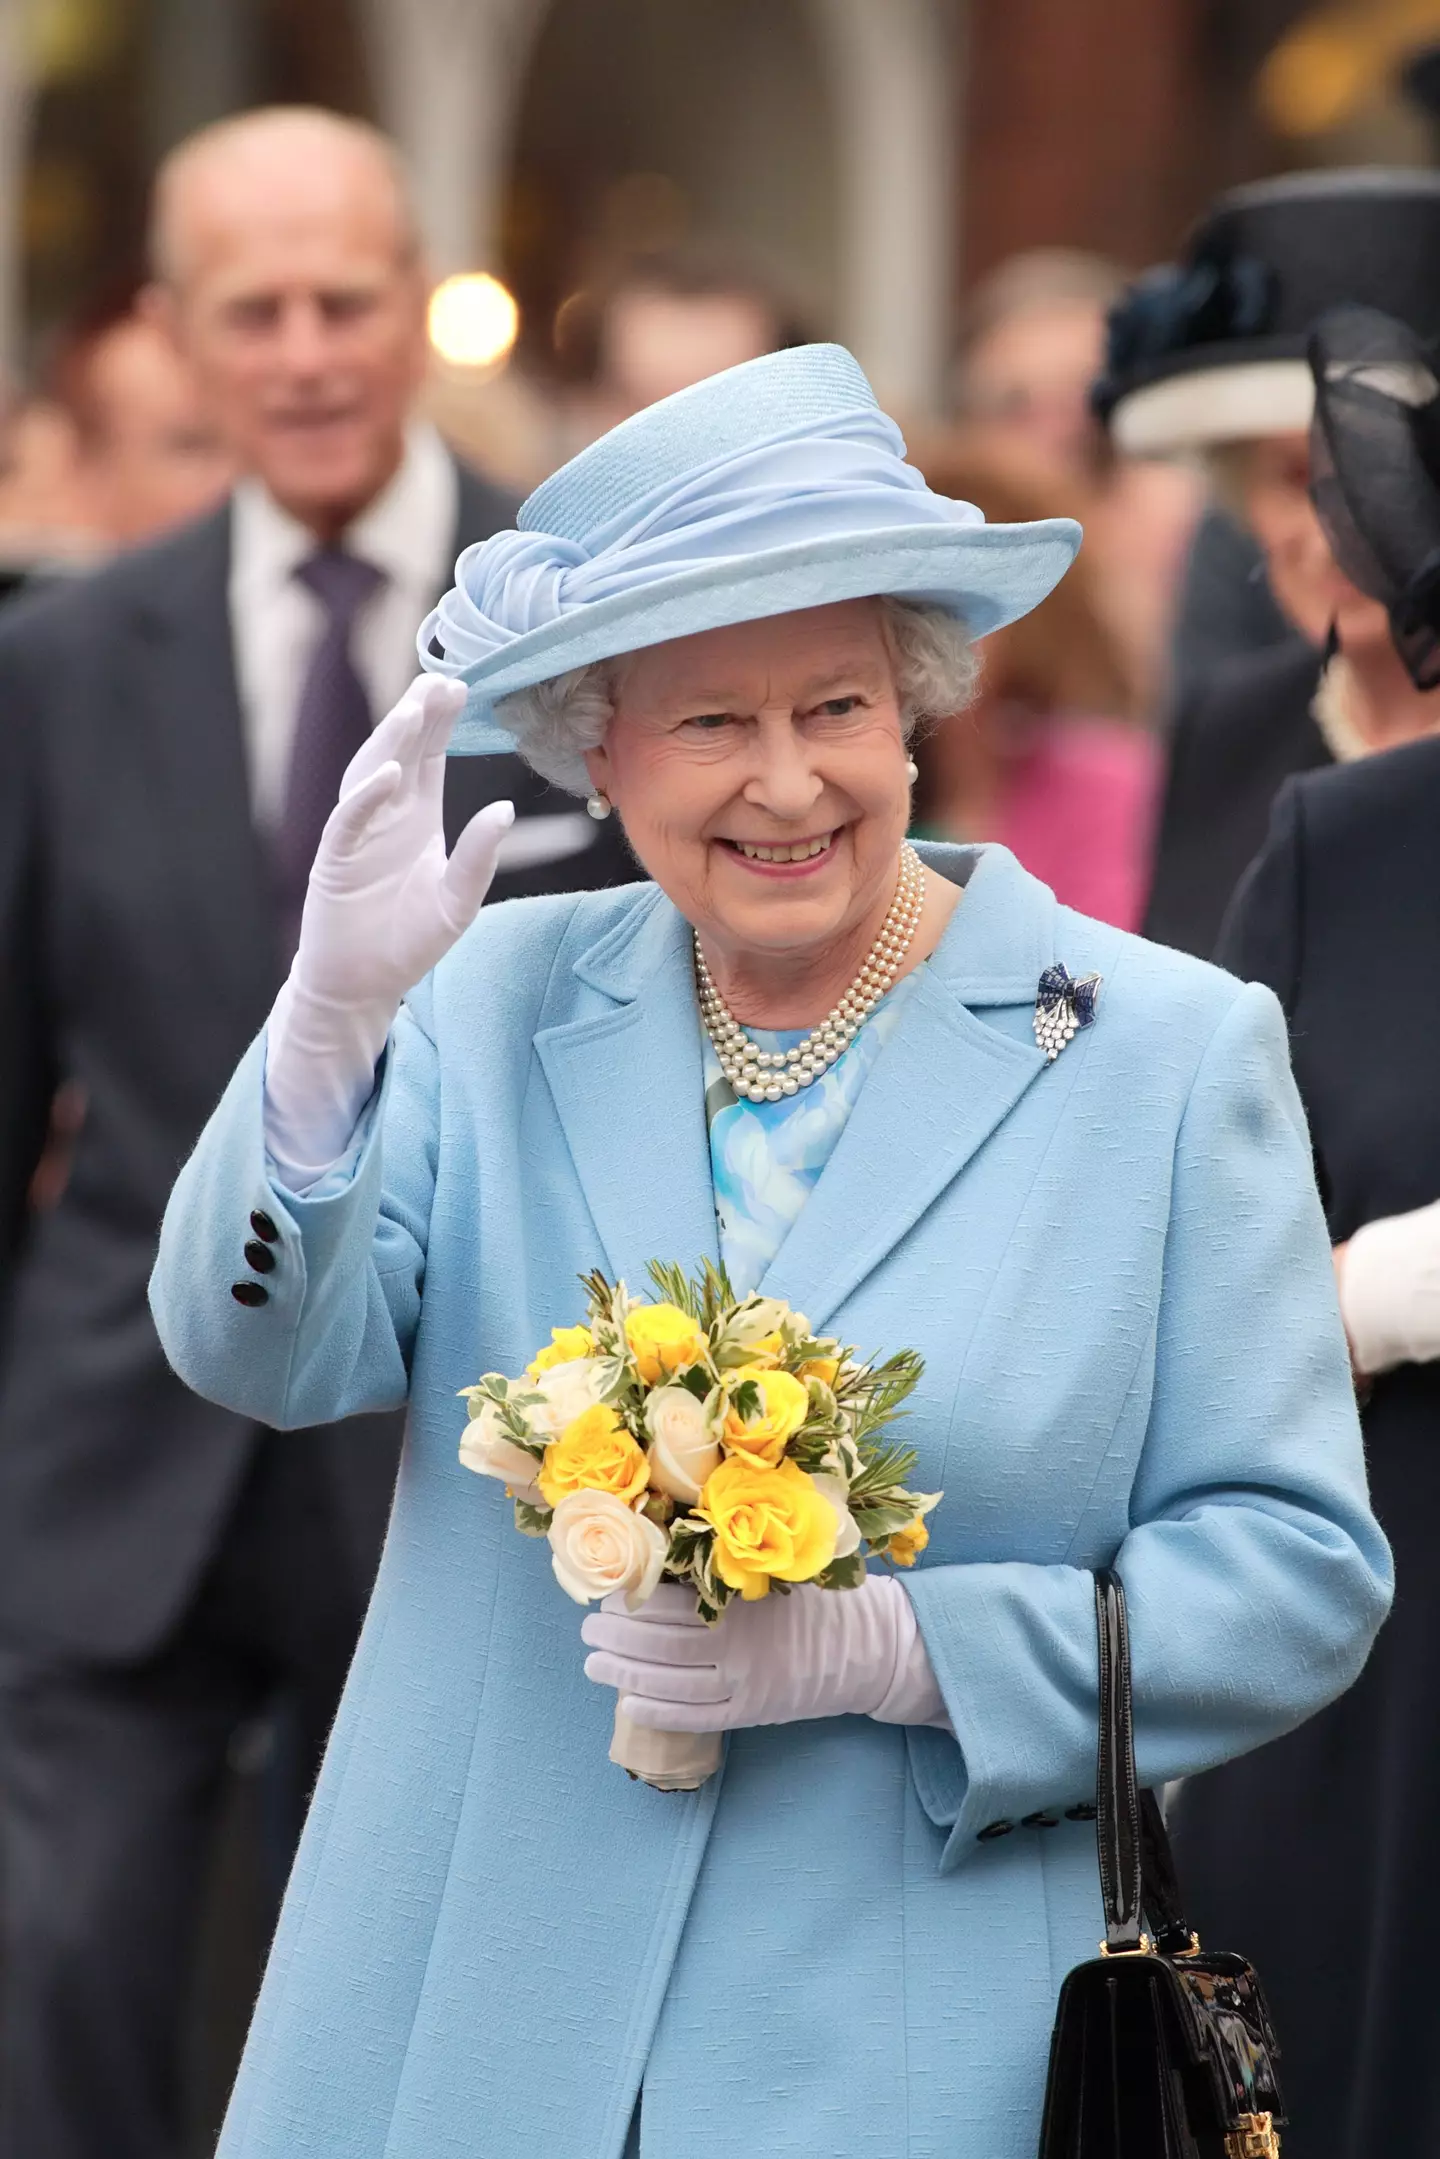 Buckingham Palace has released a full statement in the wake of Queen Elizabeth II’s death aged 96.